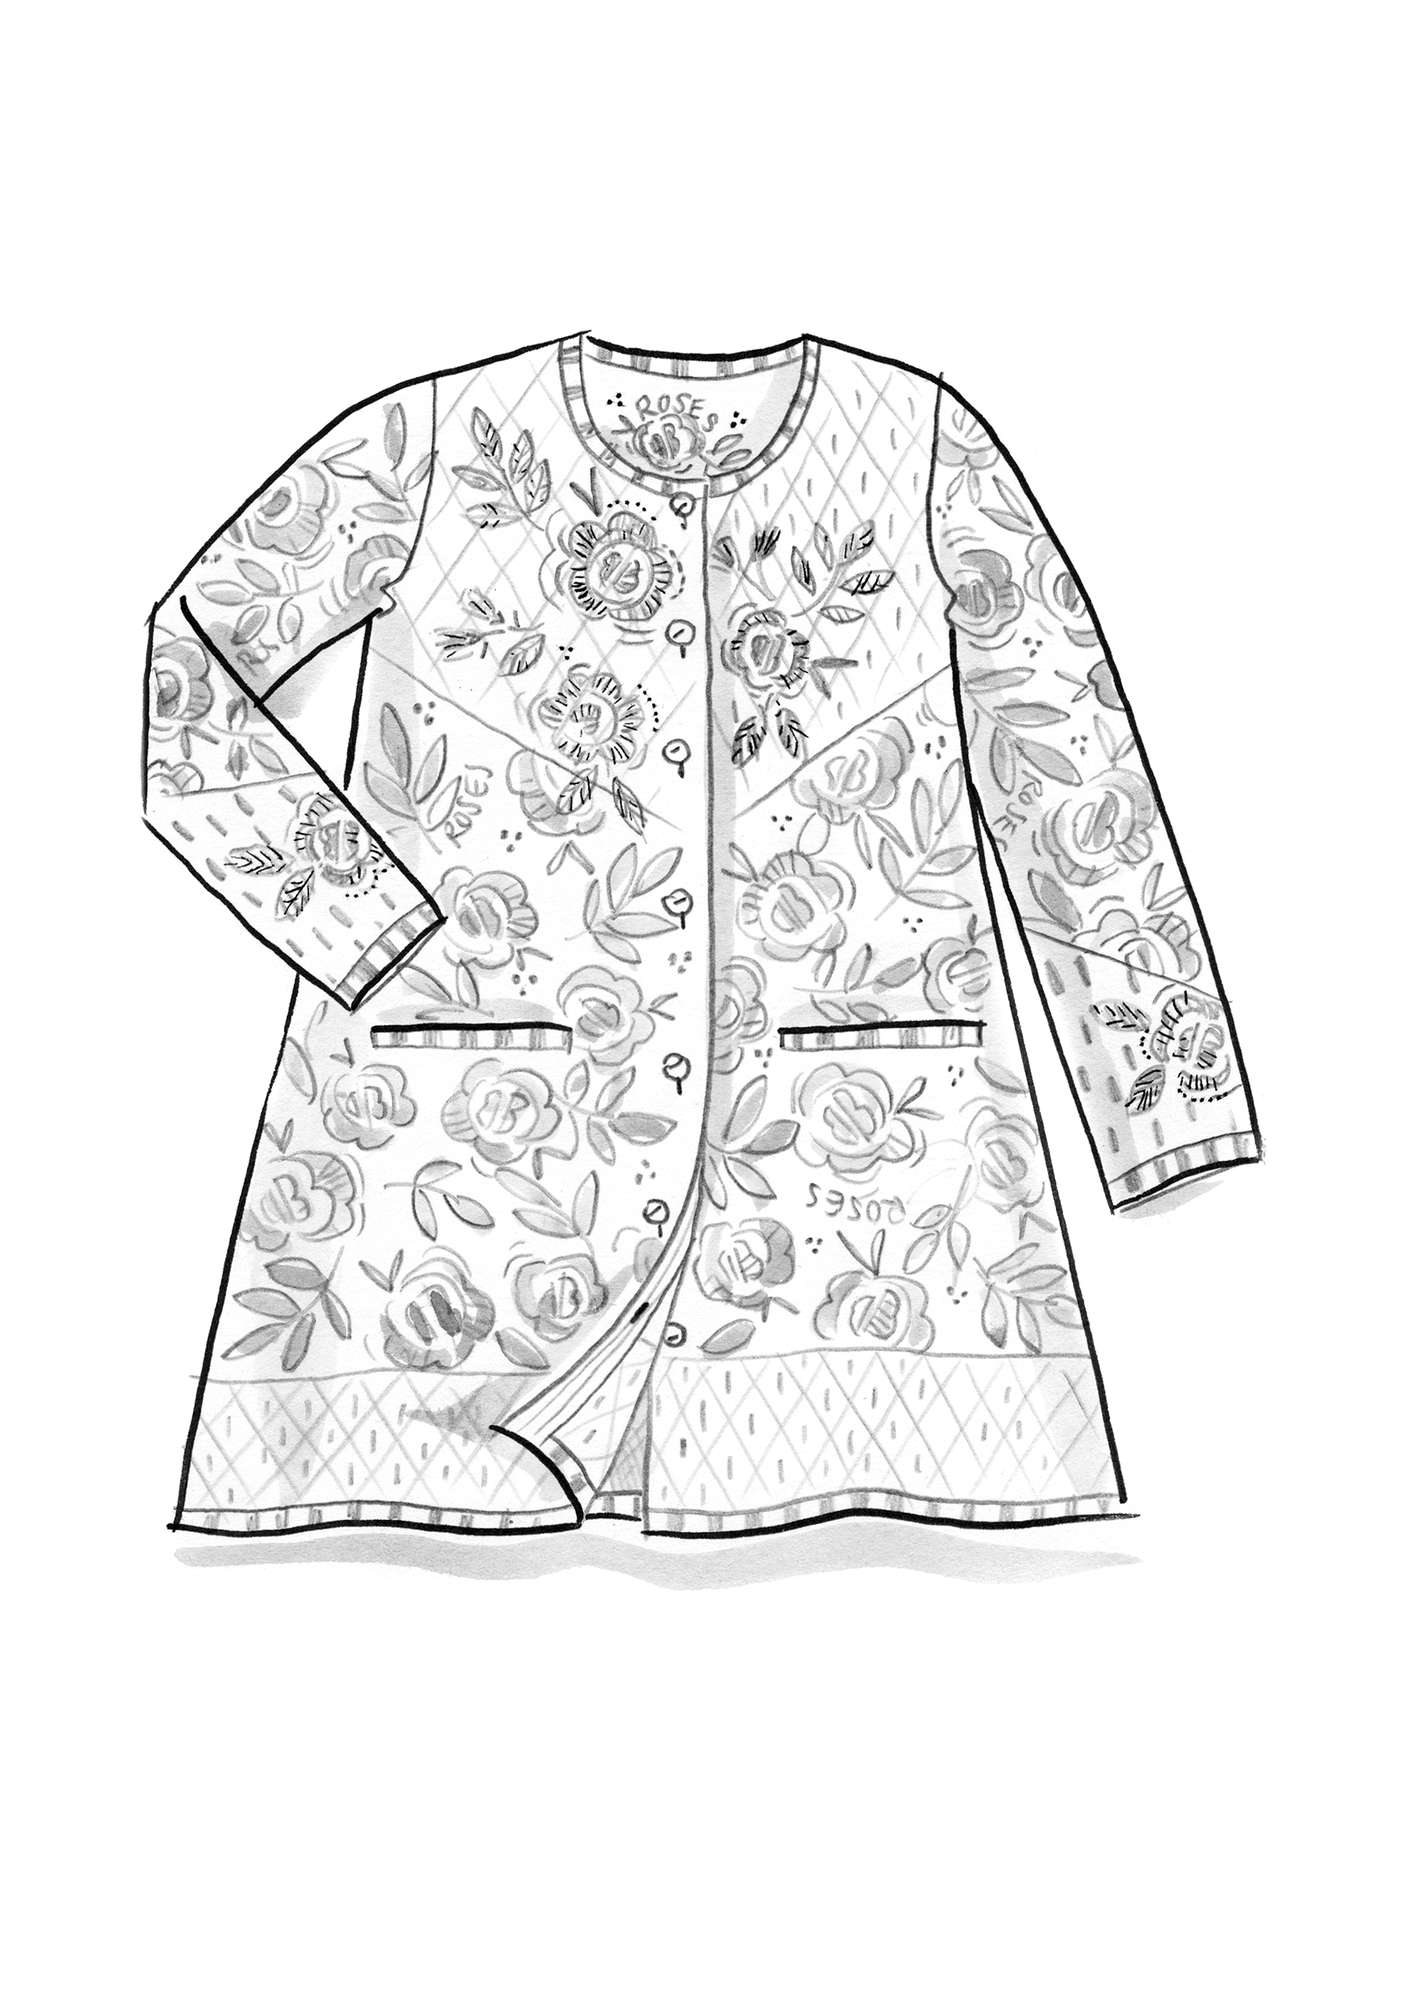 “China Rose” hand-embroidered cardigan in a wool and organic cotton blend black